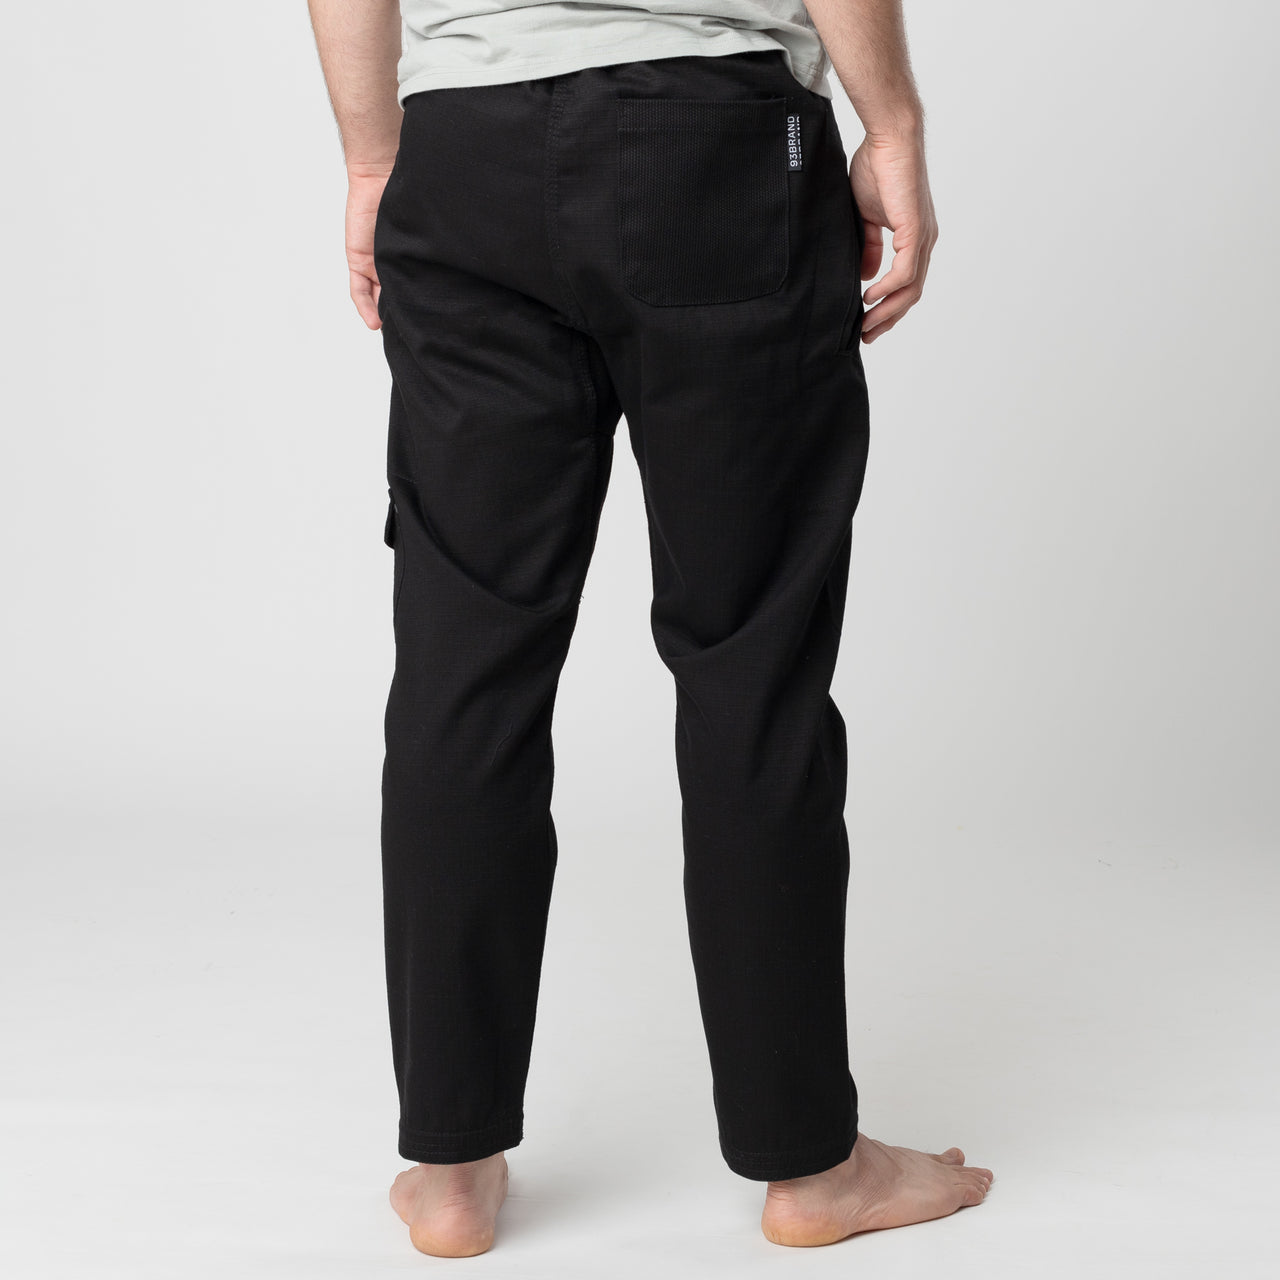 93brand Butterfly Originals Casual Gi Pants - Black